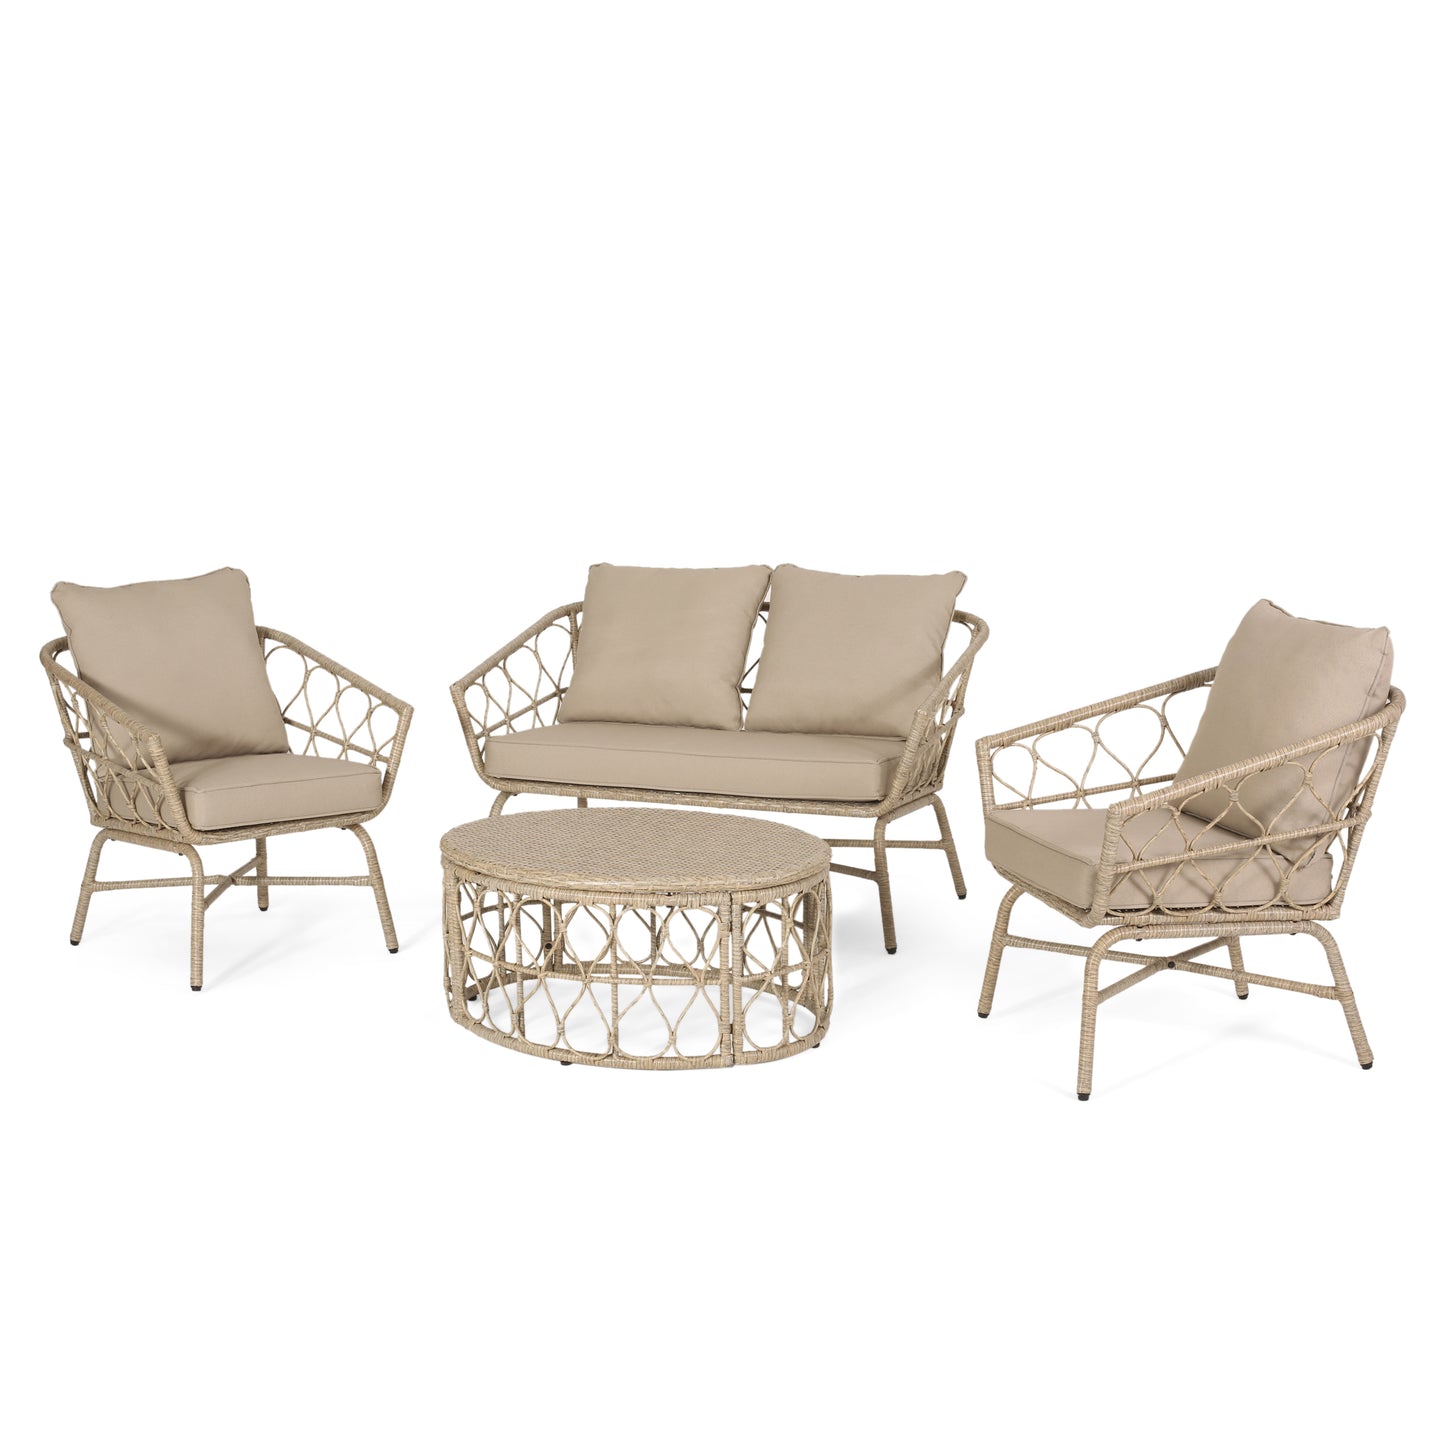 Colmar Outdoor Wicker 4 Seater Chat Set with Cushions, Light Brown and Beige